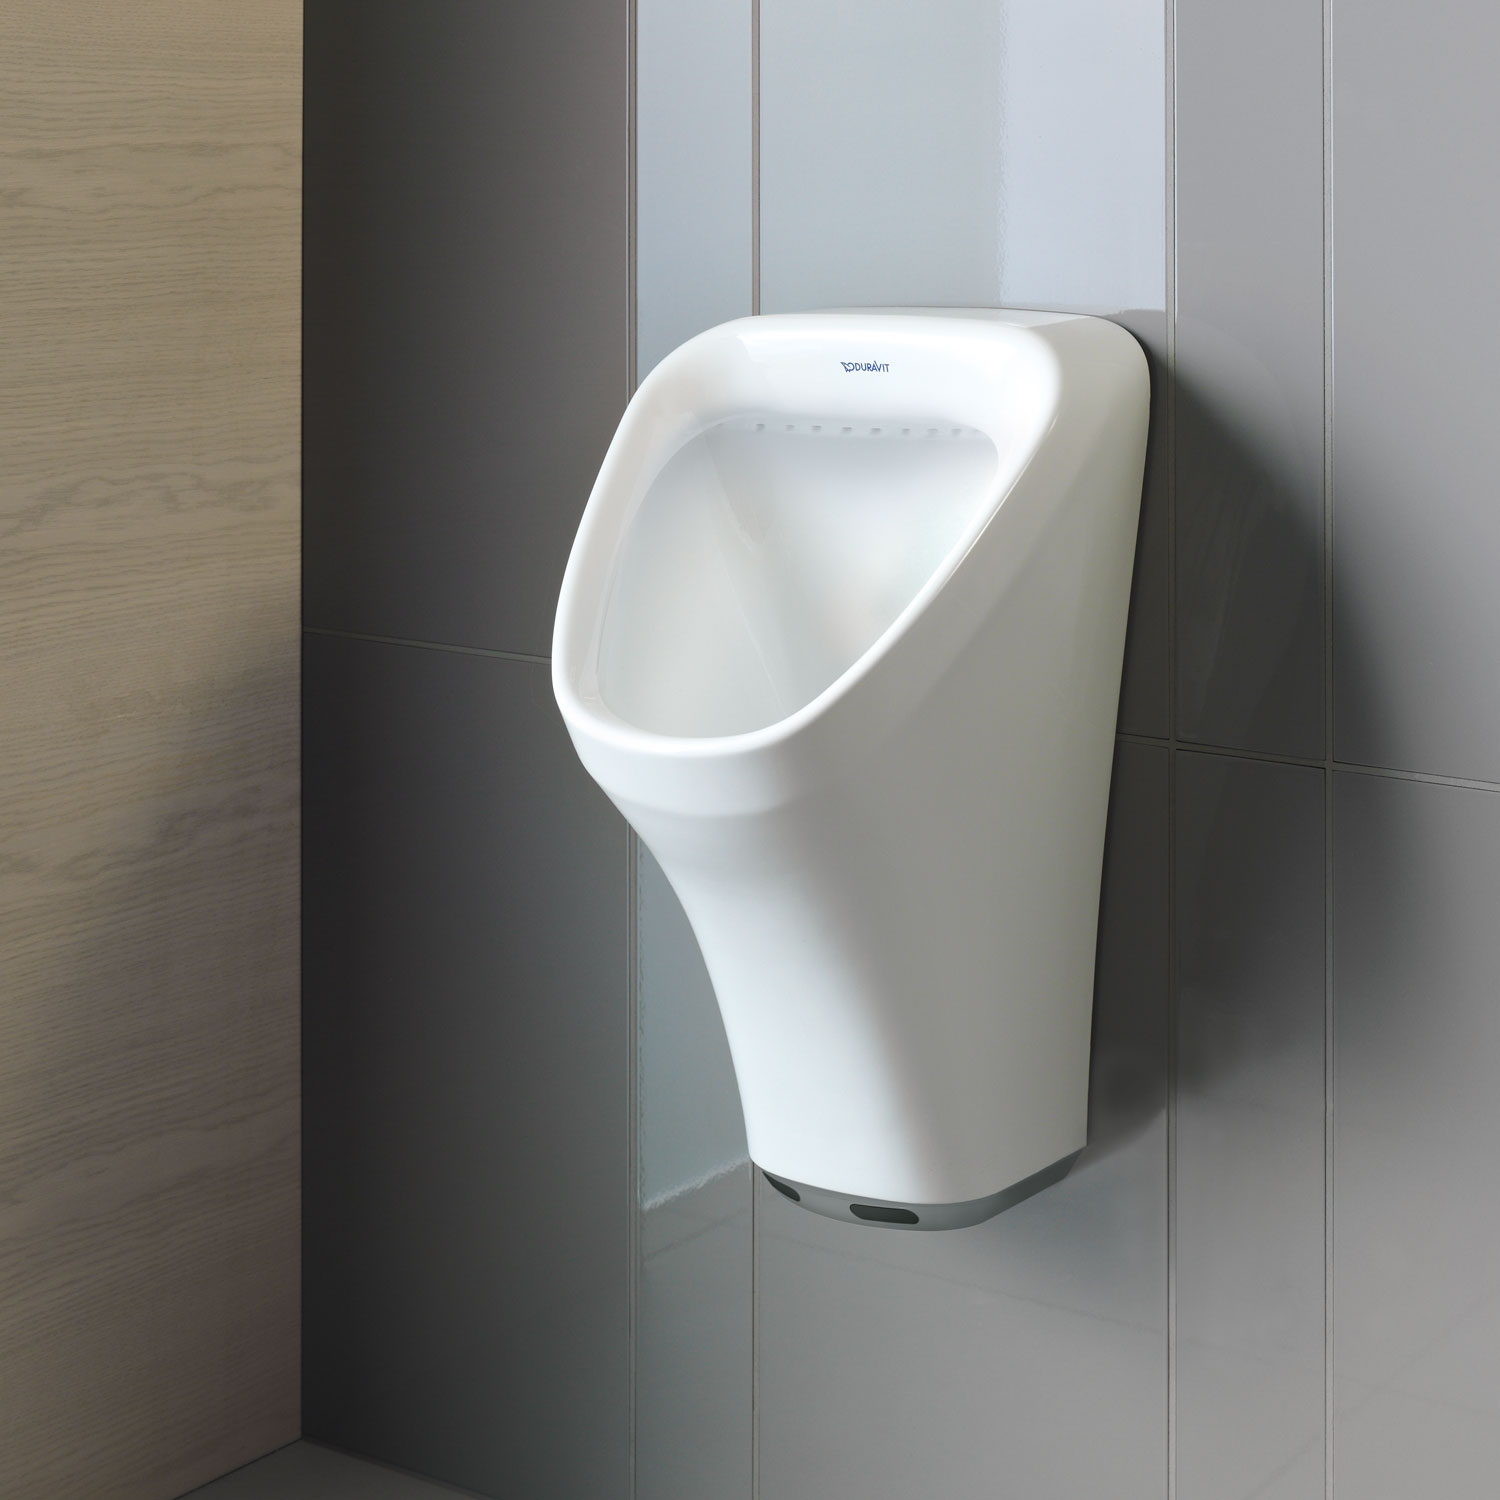 Duraplus urinal without cover
